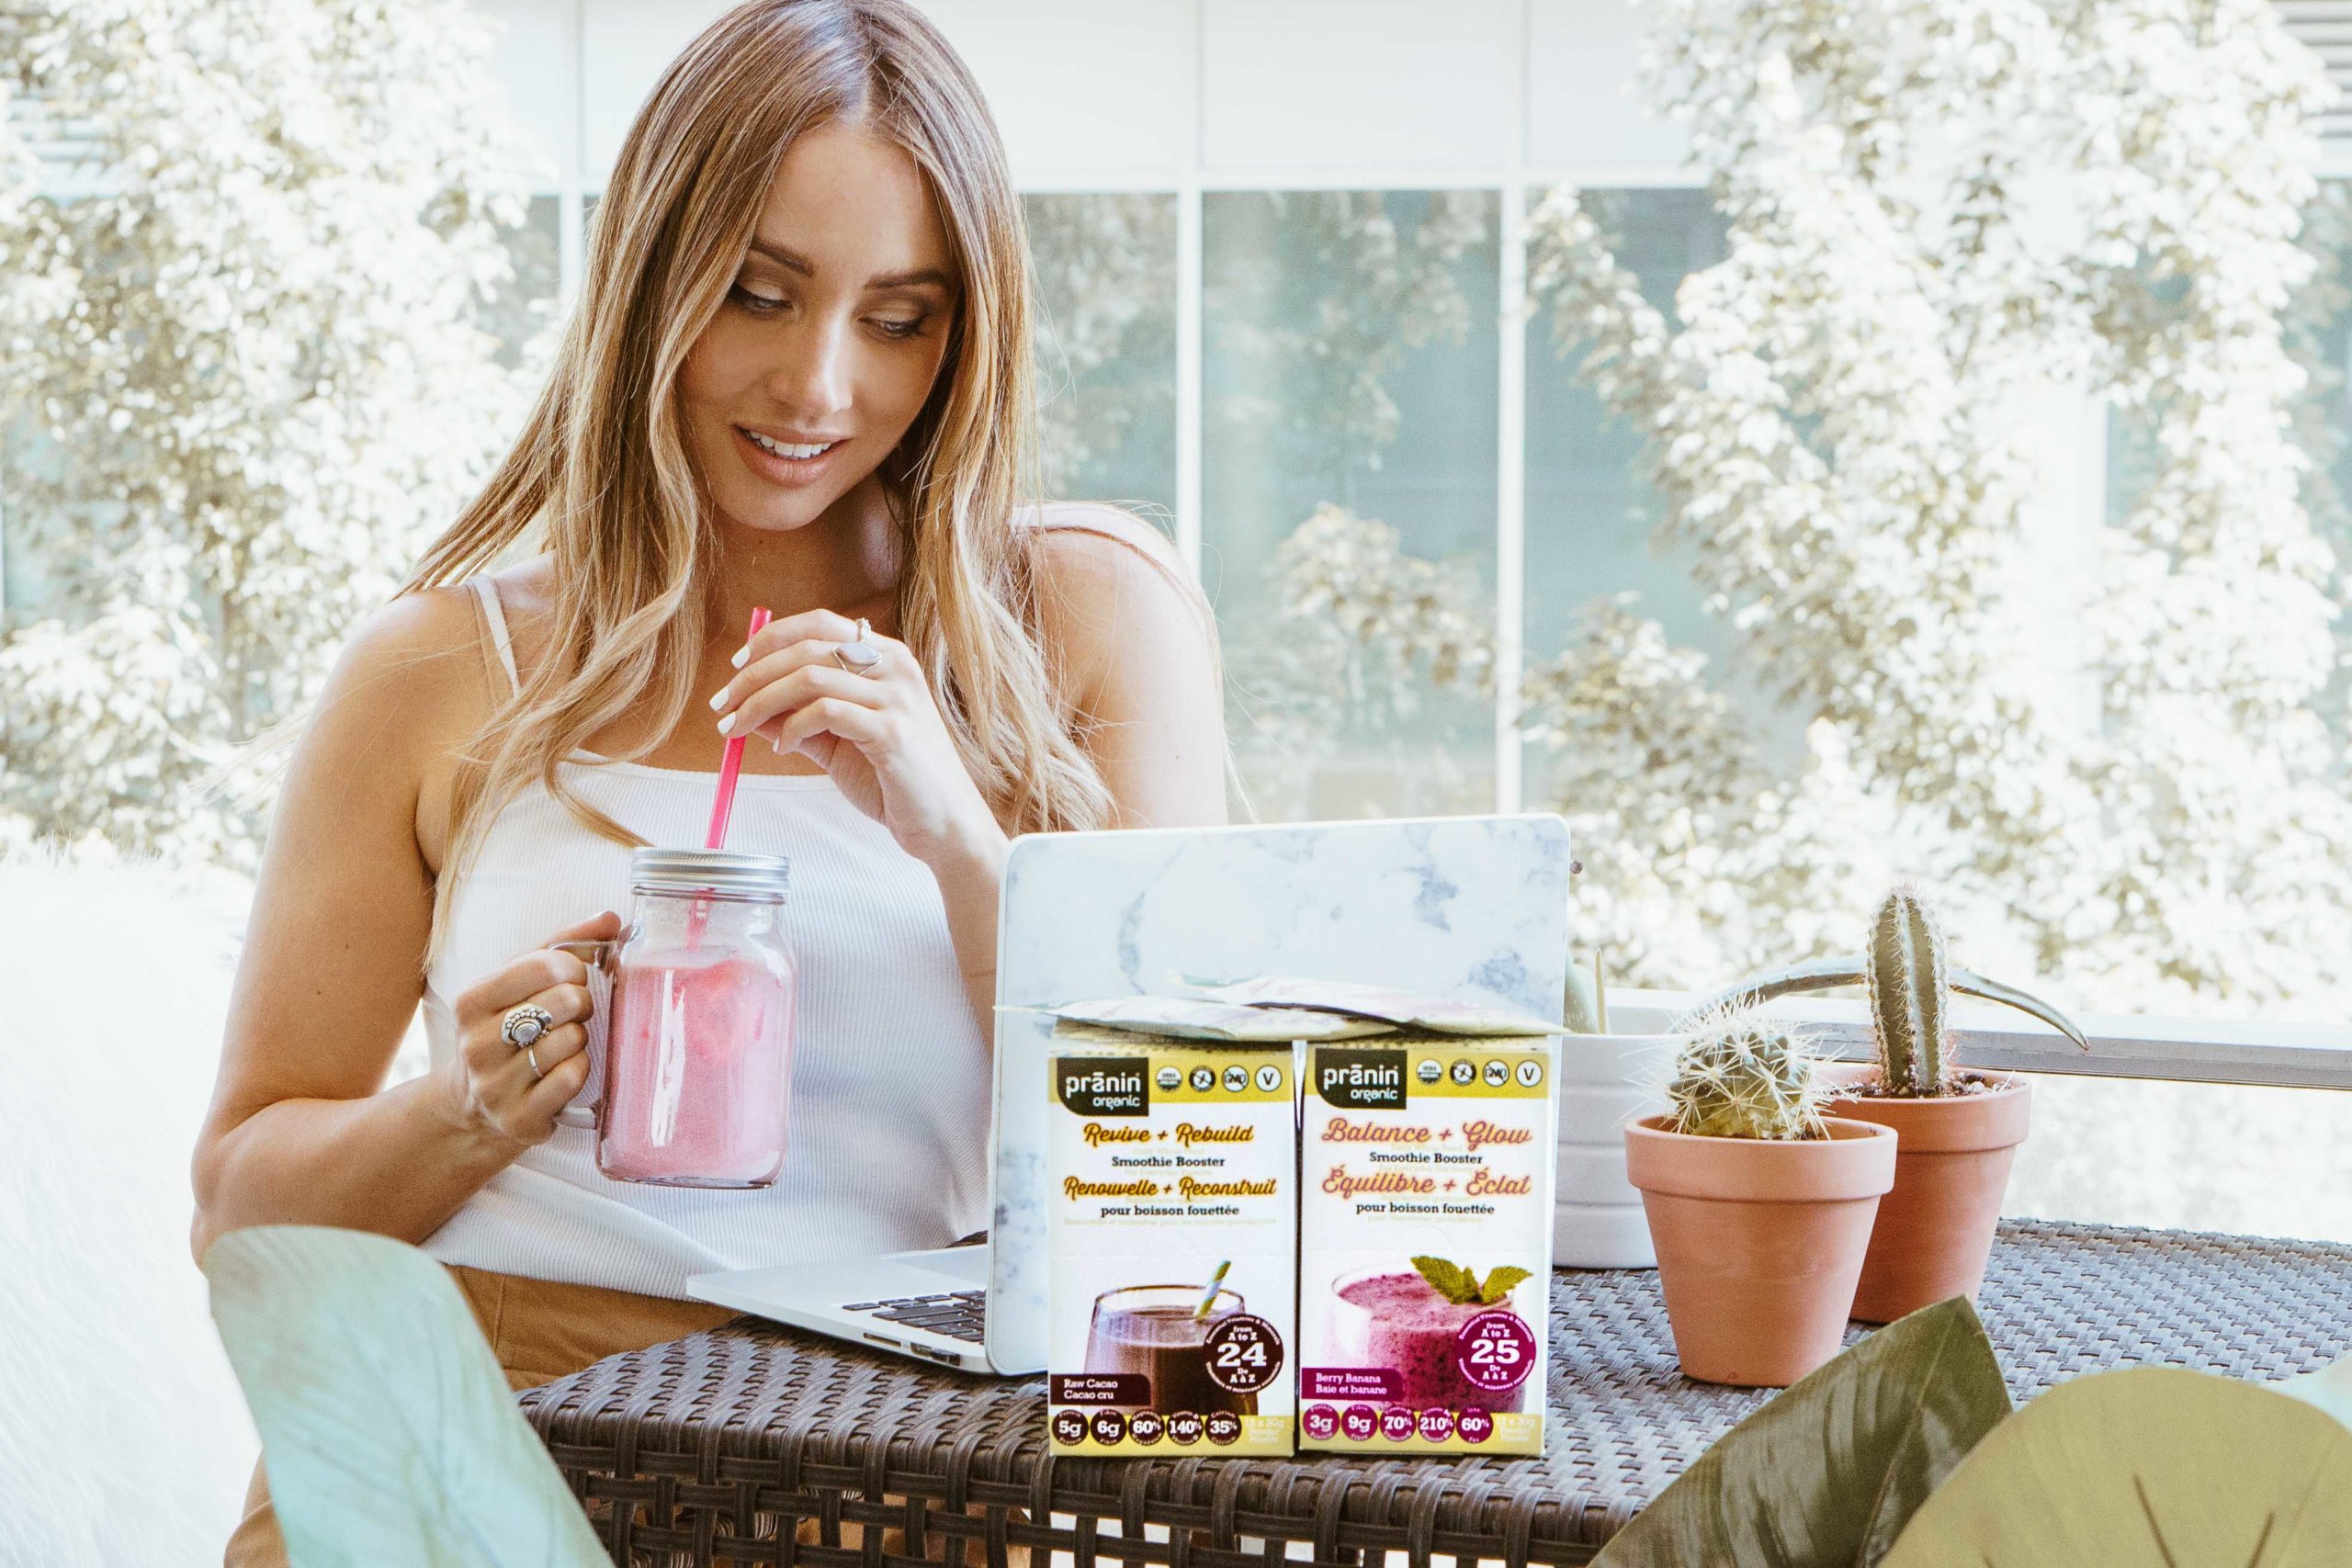 Increase Energy with Pranin Organic Smoothie Boosters